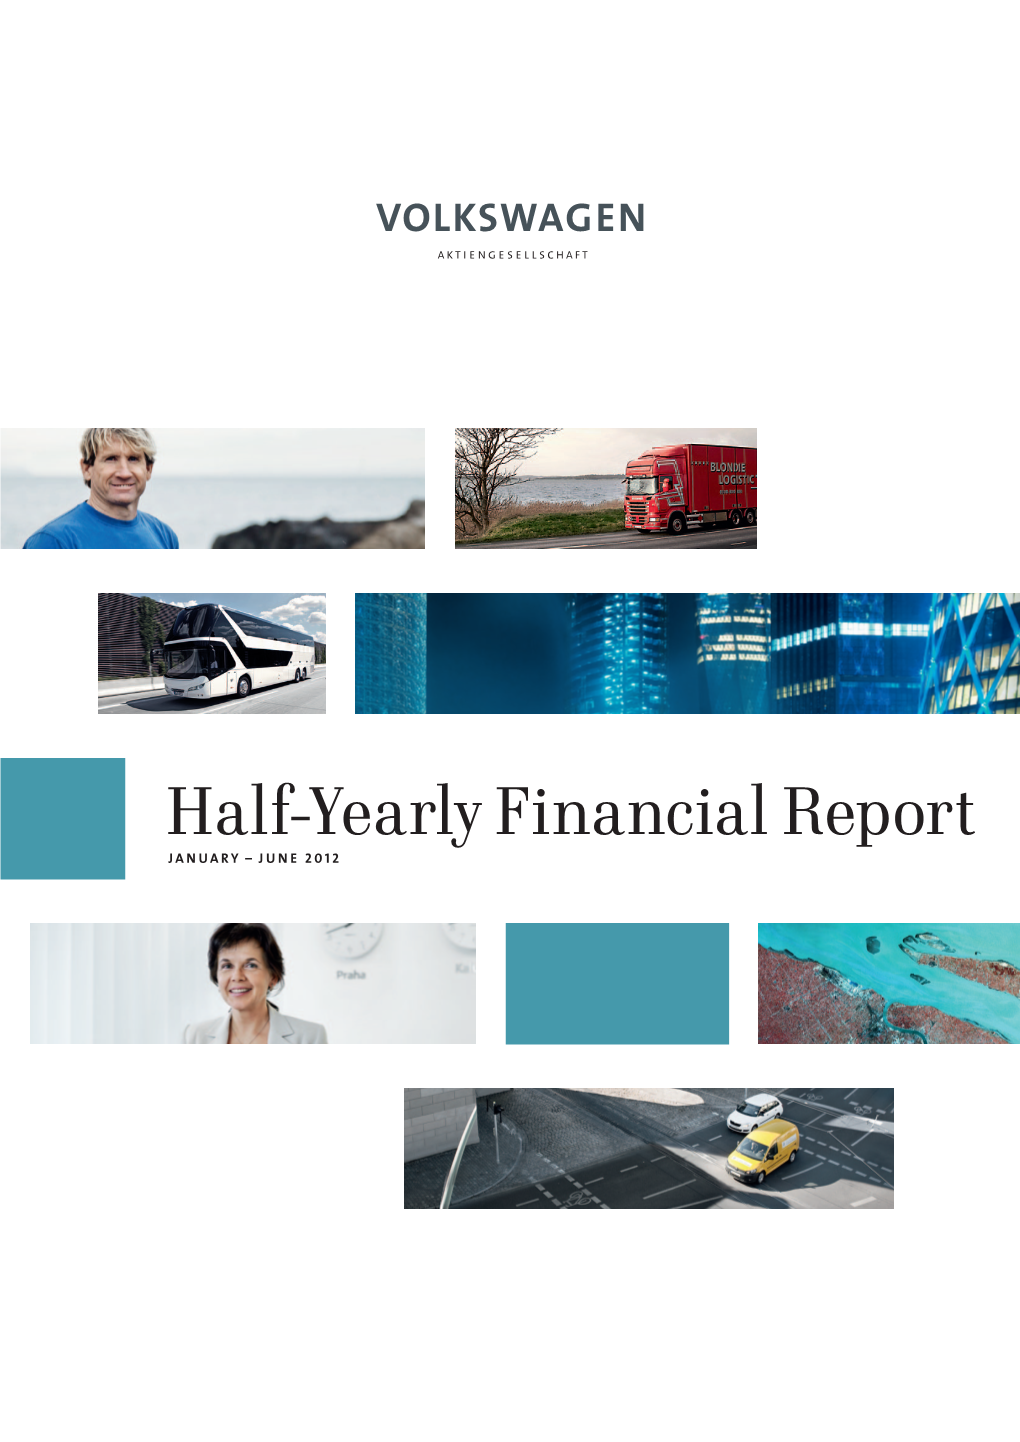 Half-Yearly Financial Report